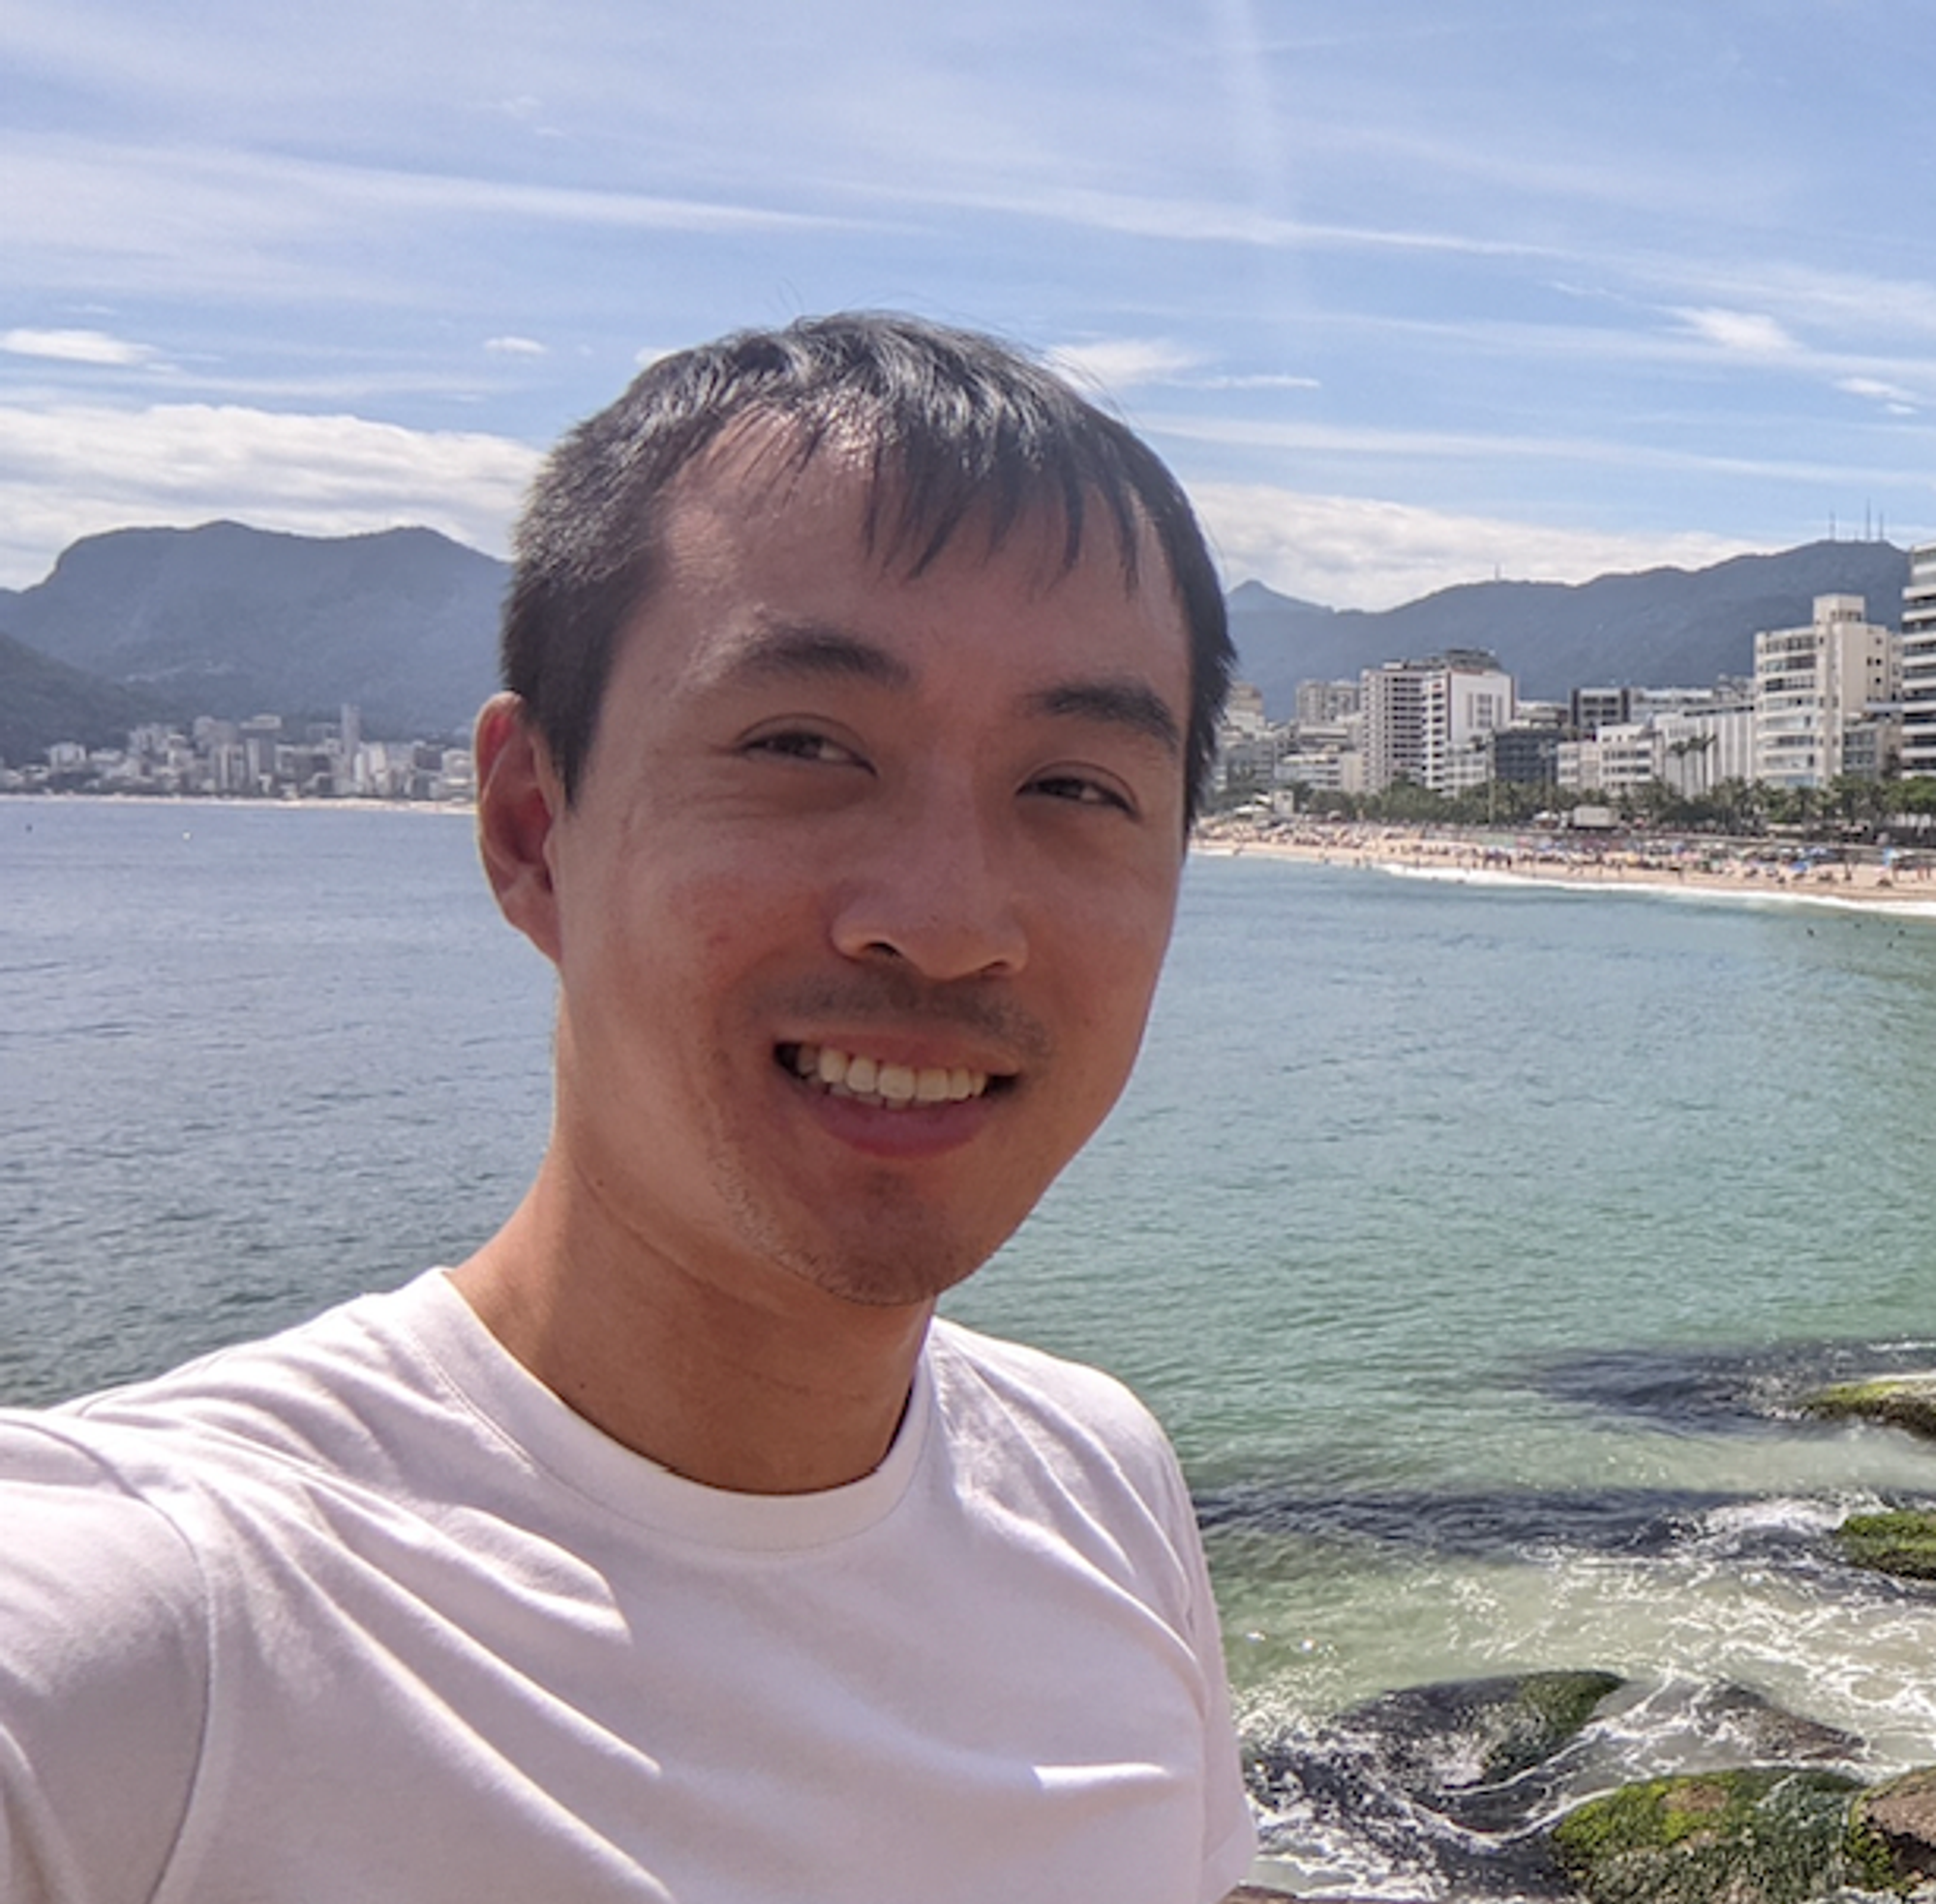 Trevor Weng
Software Engineer
Former senior eng @ Airbnb, ex Facebook • Love hiking, tennis, and strategy games